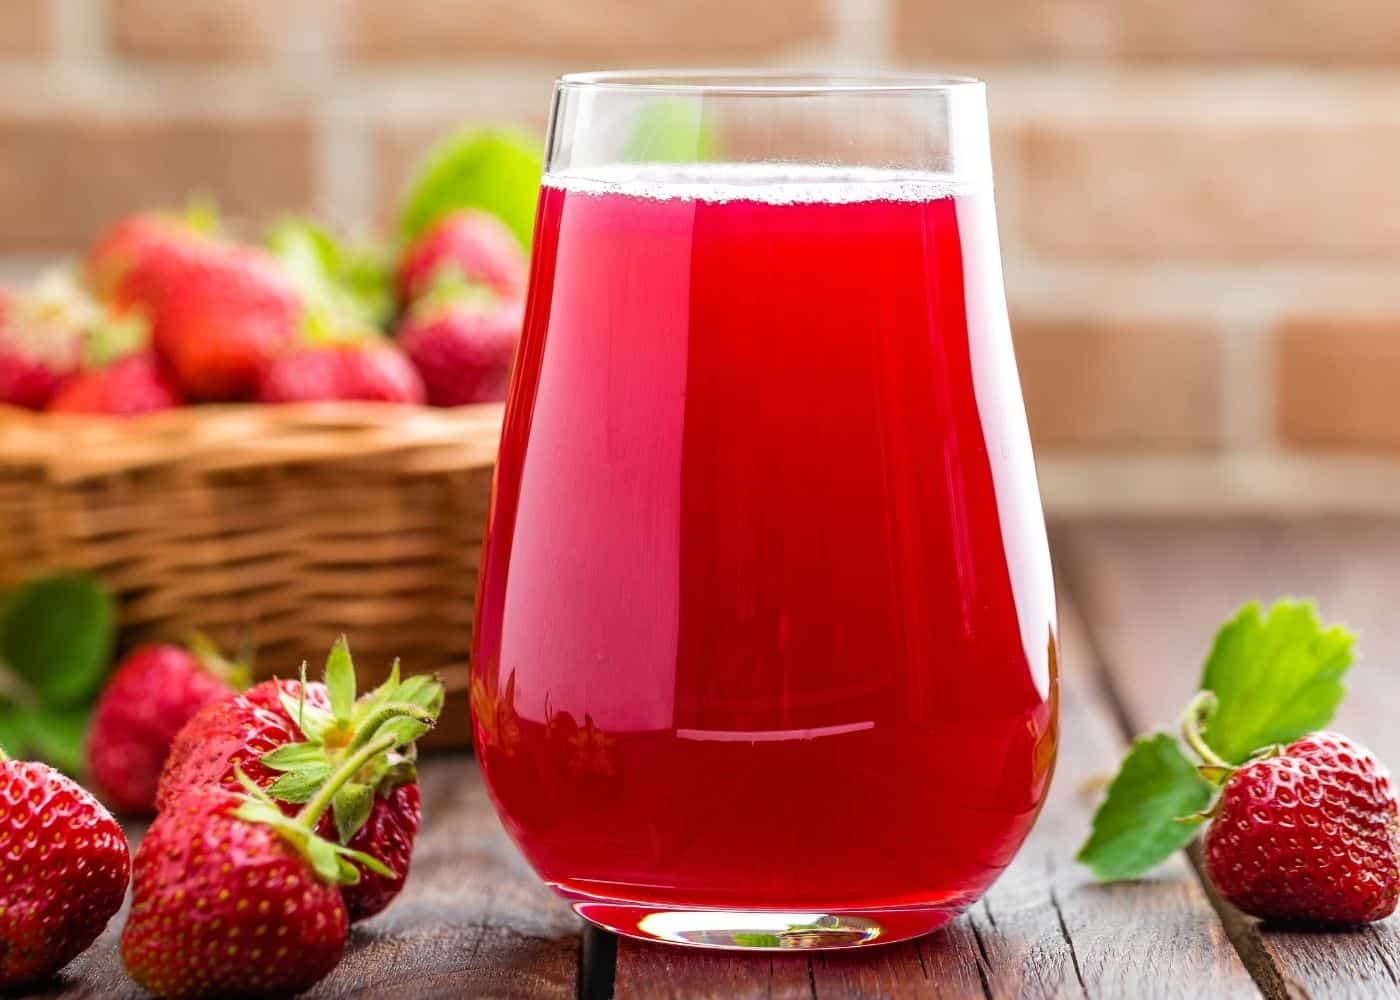 https://www.cleaneatingkitchen.com/wp-content/uploads/2022/05/strawberry-juice-in-pretty-glass.jpg